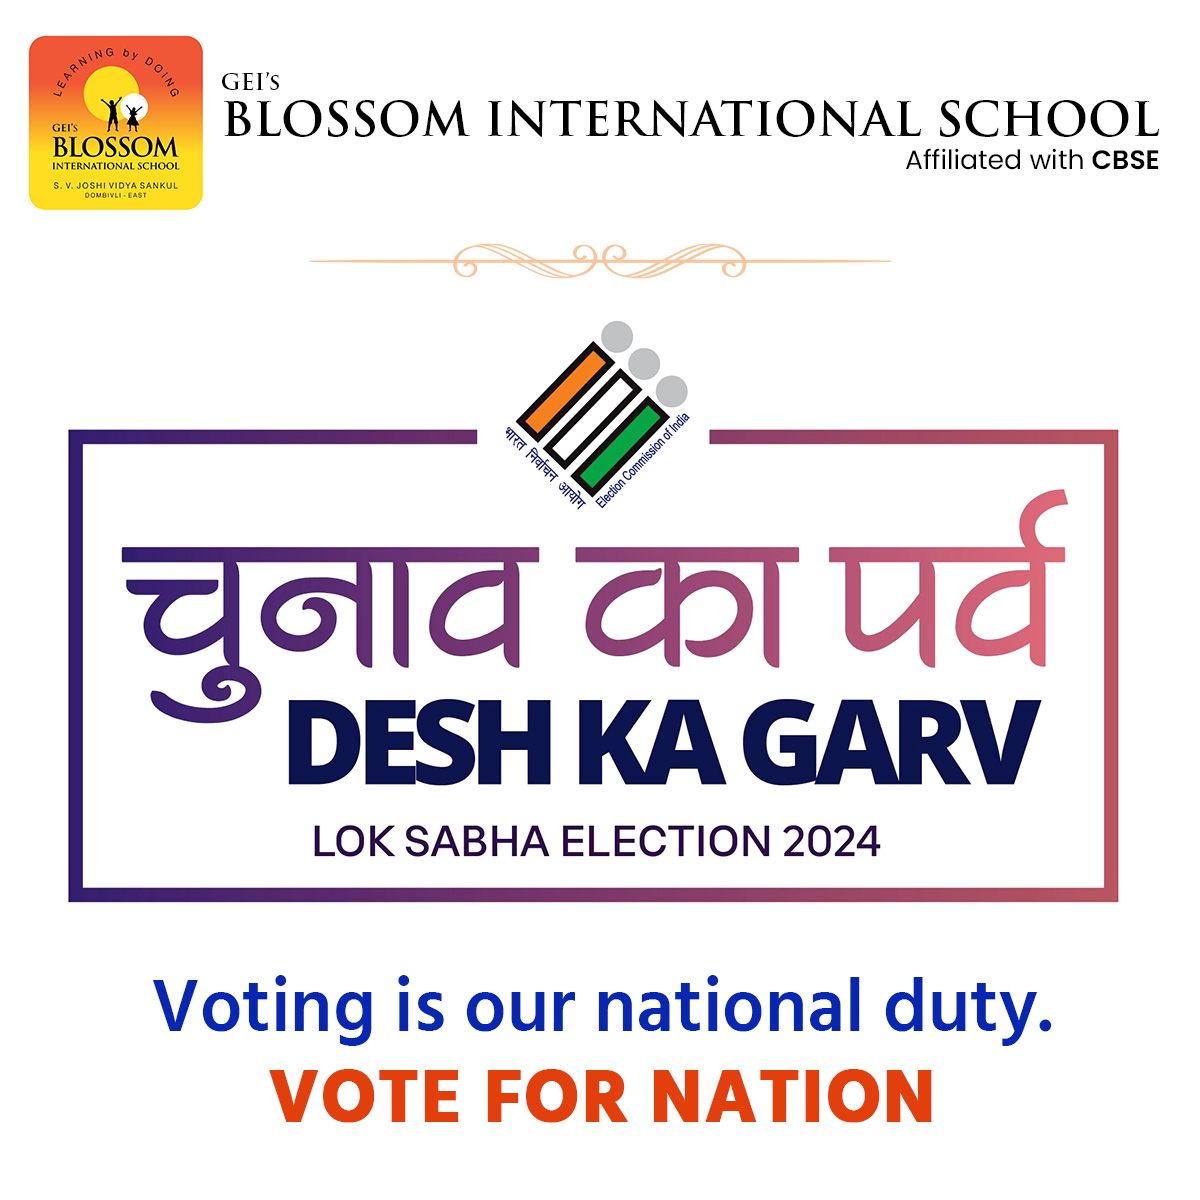 Voting is our national duty | Vote for Nation.